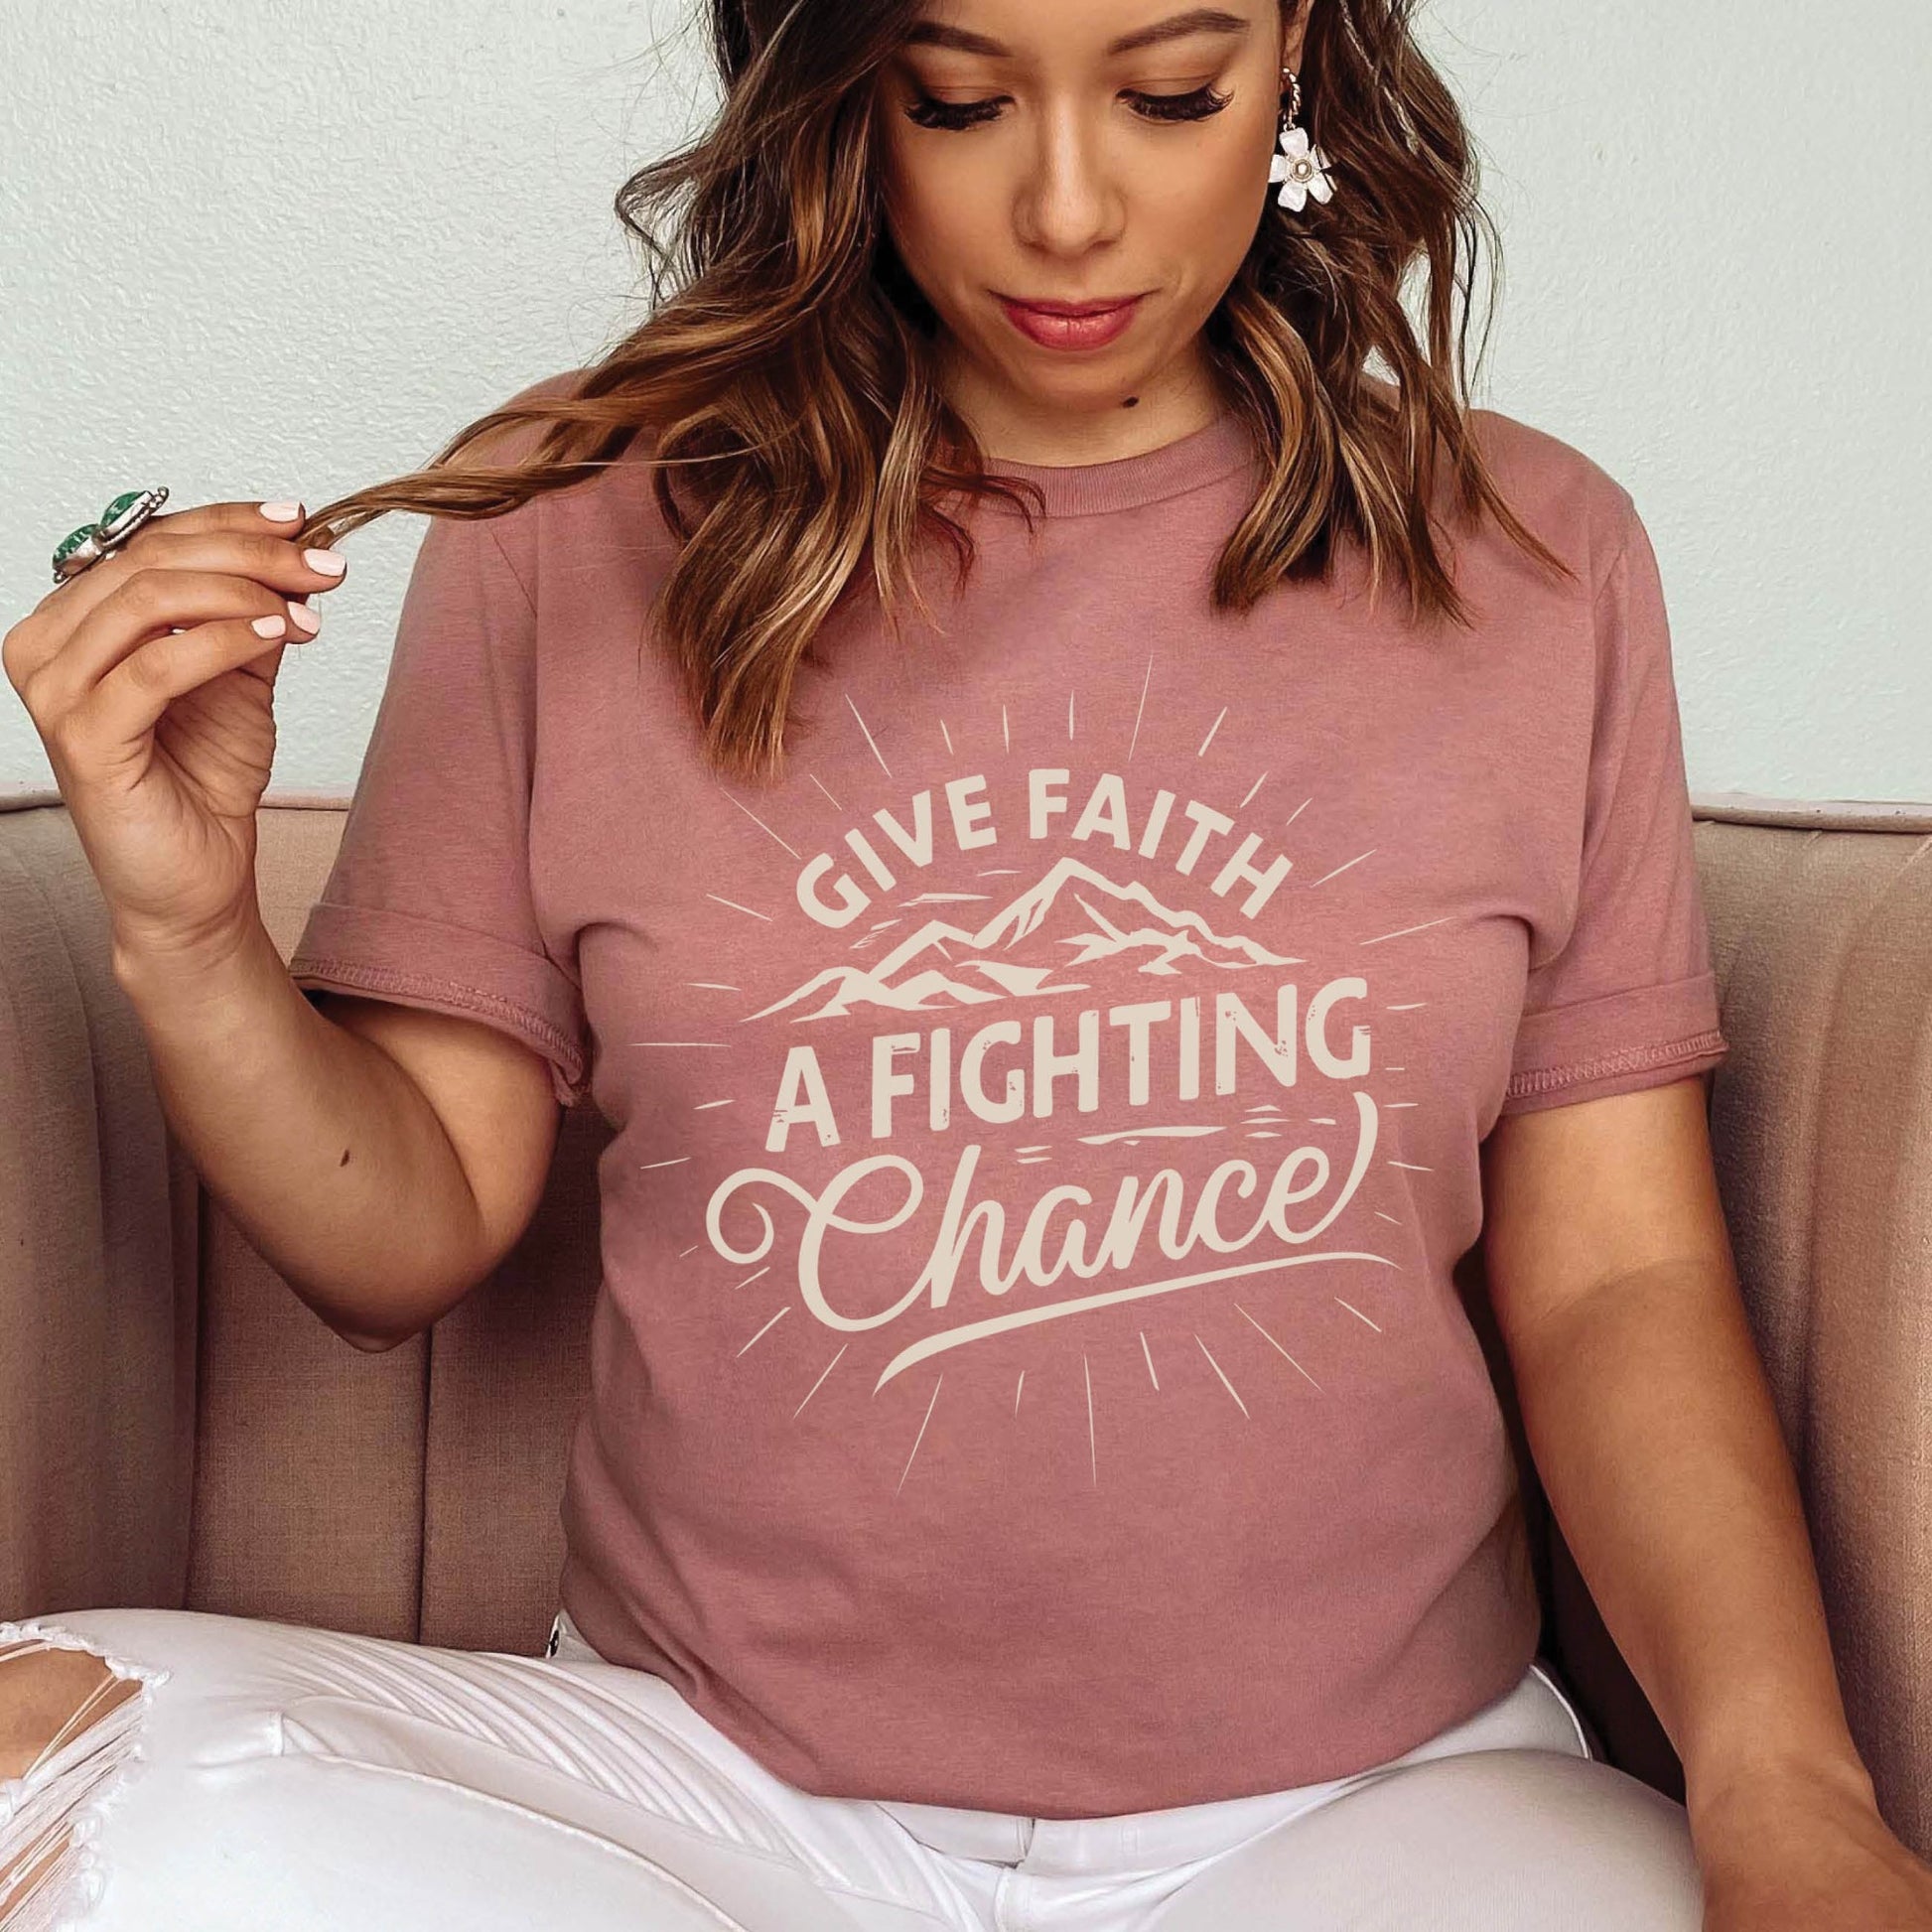 Modern young woman wearing a mauve pink Unisex Tee with Christian Bible verse quote that says, "Give Faith A Fighting Chance" with retro sunburst and mountain graphics, t-shirt designed for faith-based men and women